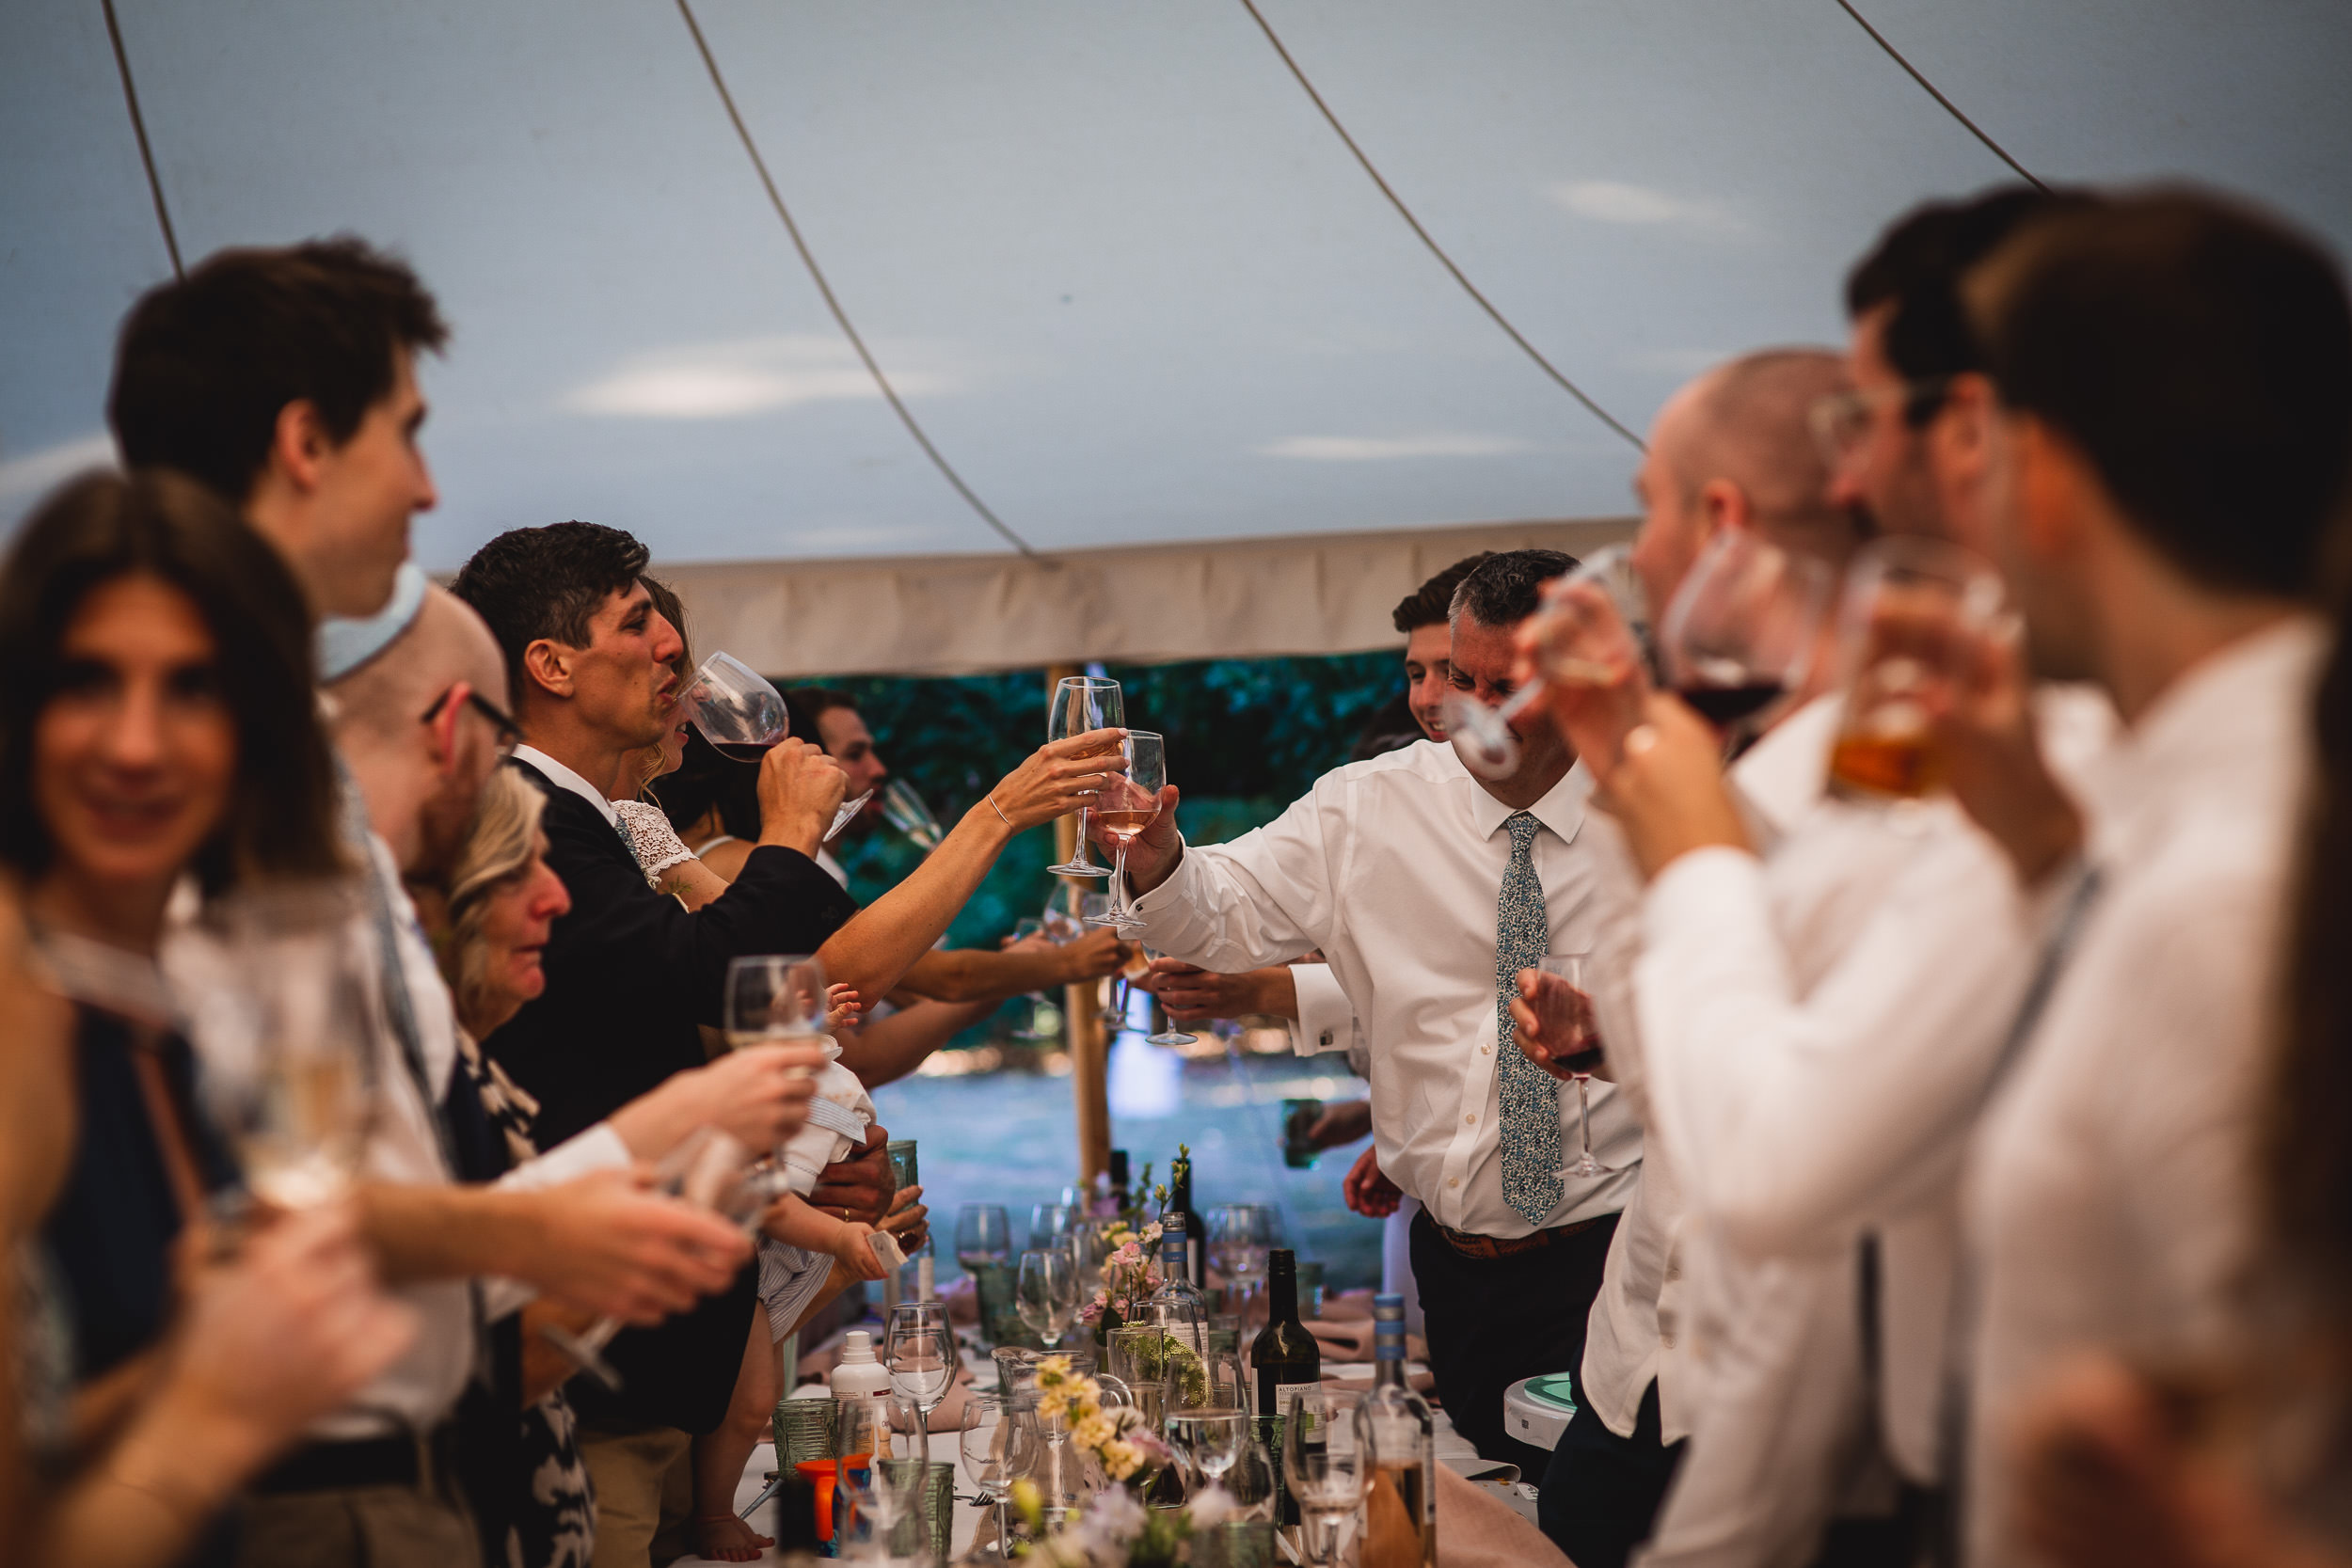 A group of people toasting at a wedding.